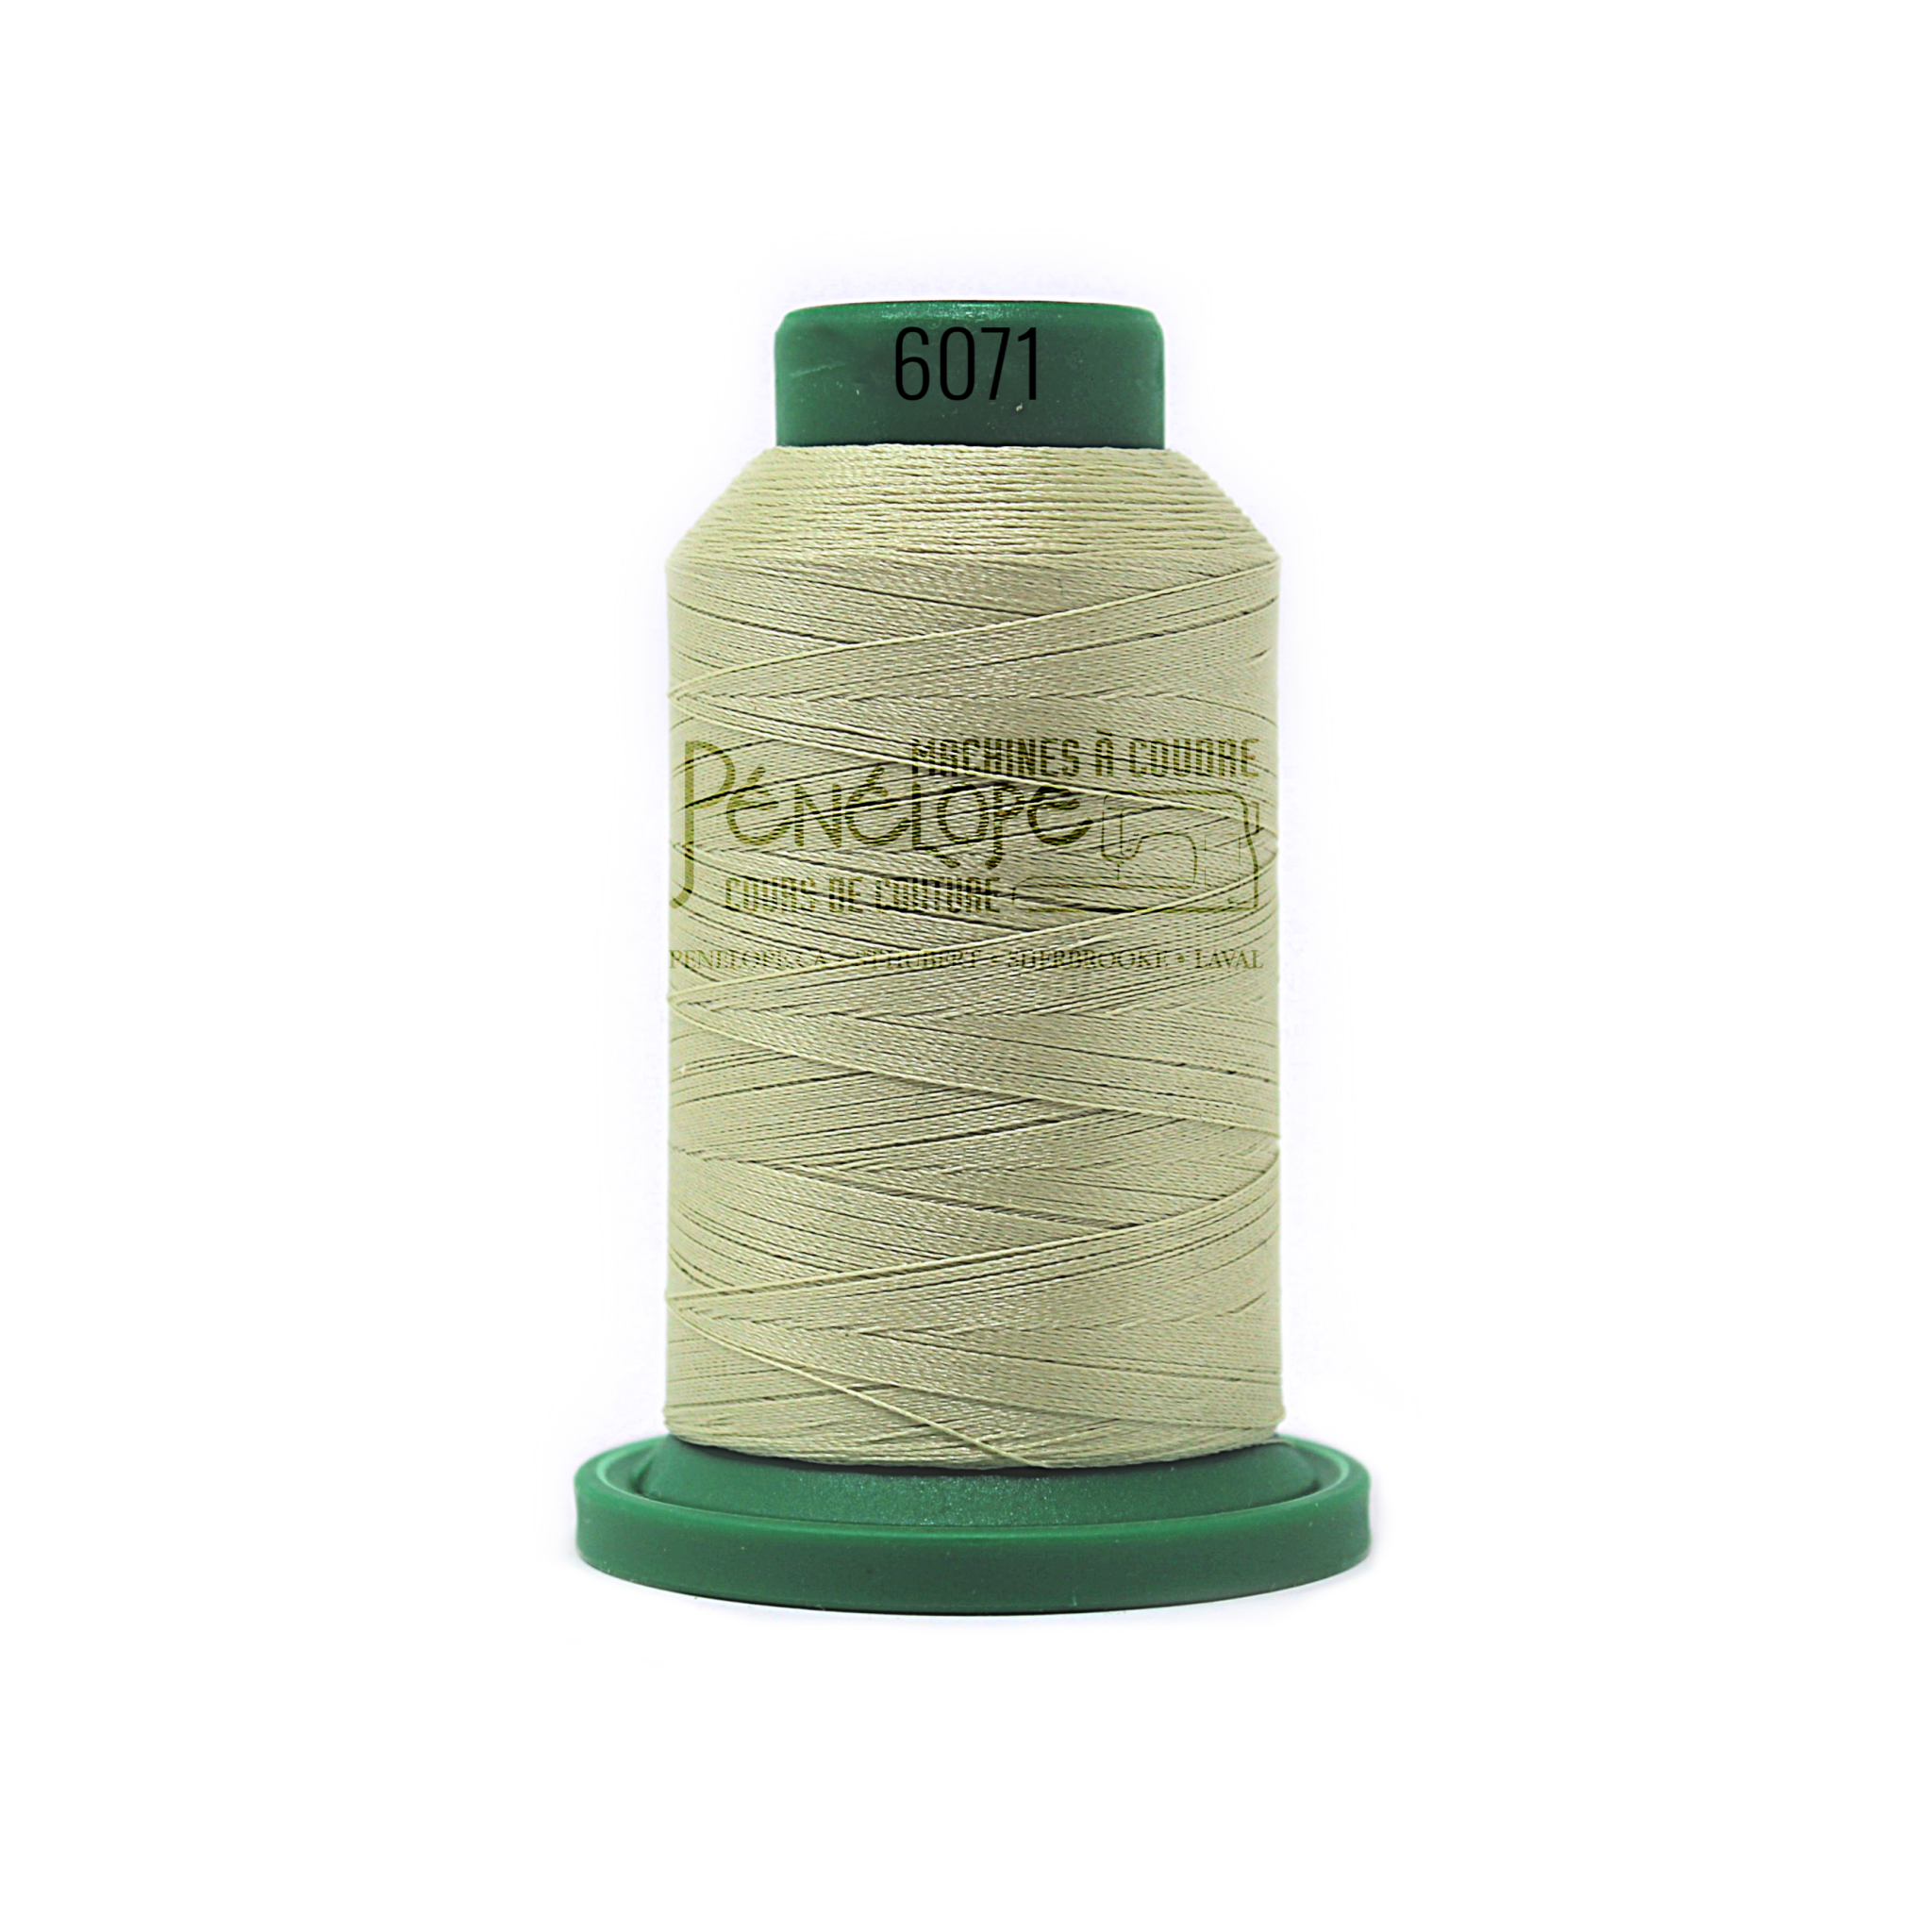 Isacord Isacord sewing and embroidery thread 6071